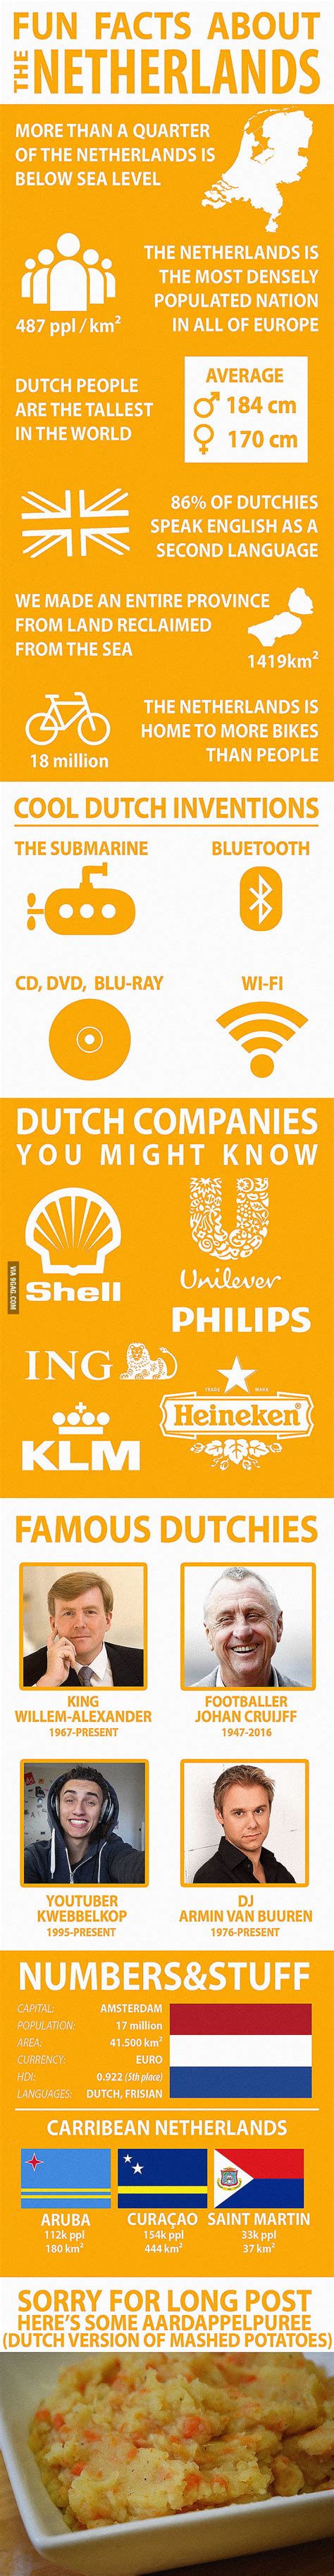 fun facts about the netherlands 9gag